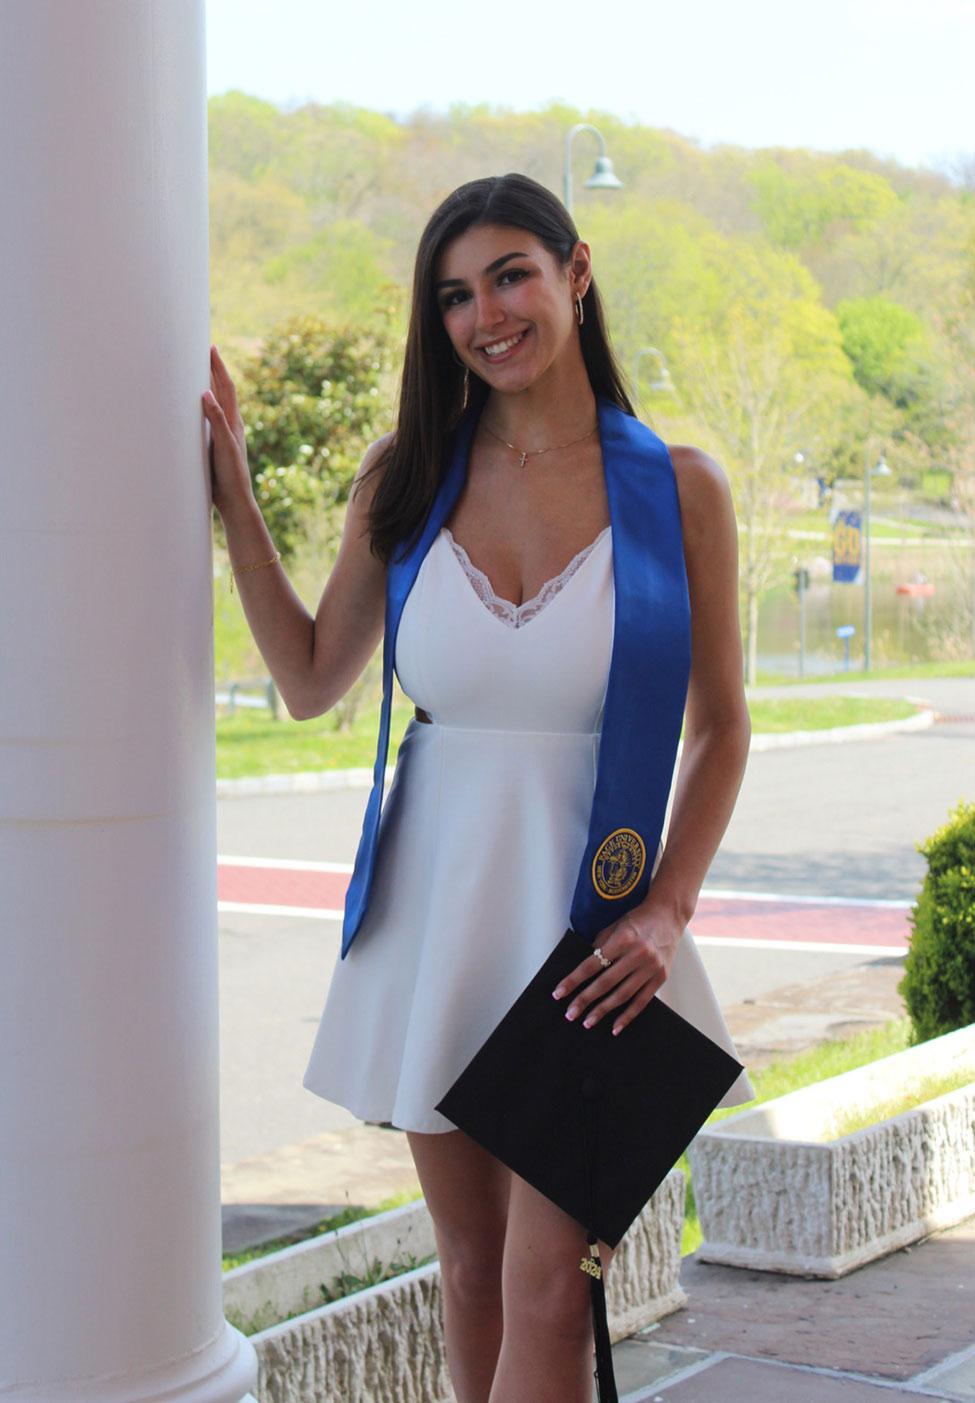 Pace University's Writing and Cultural Studies and Publishing student Nicolina Gabriella Barone